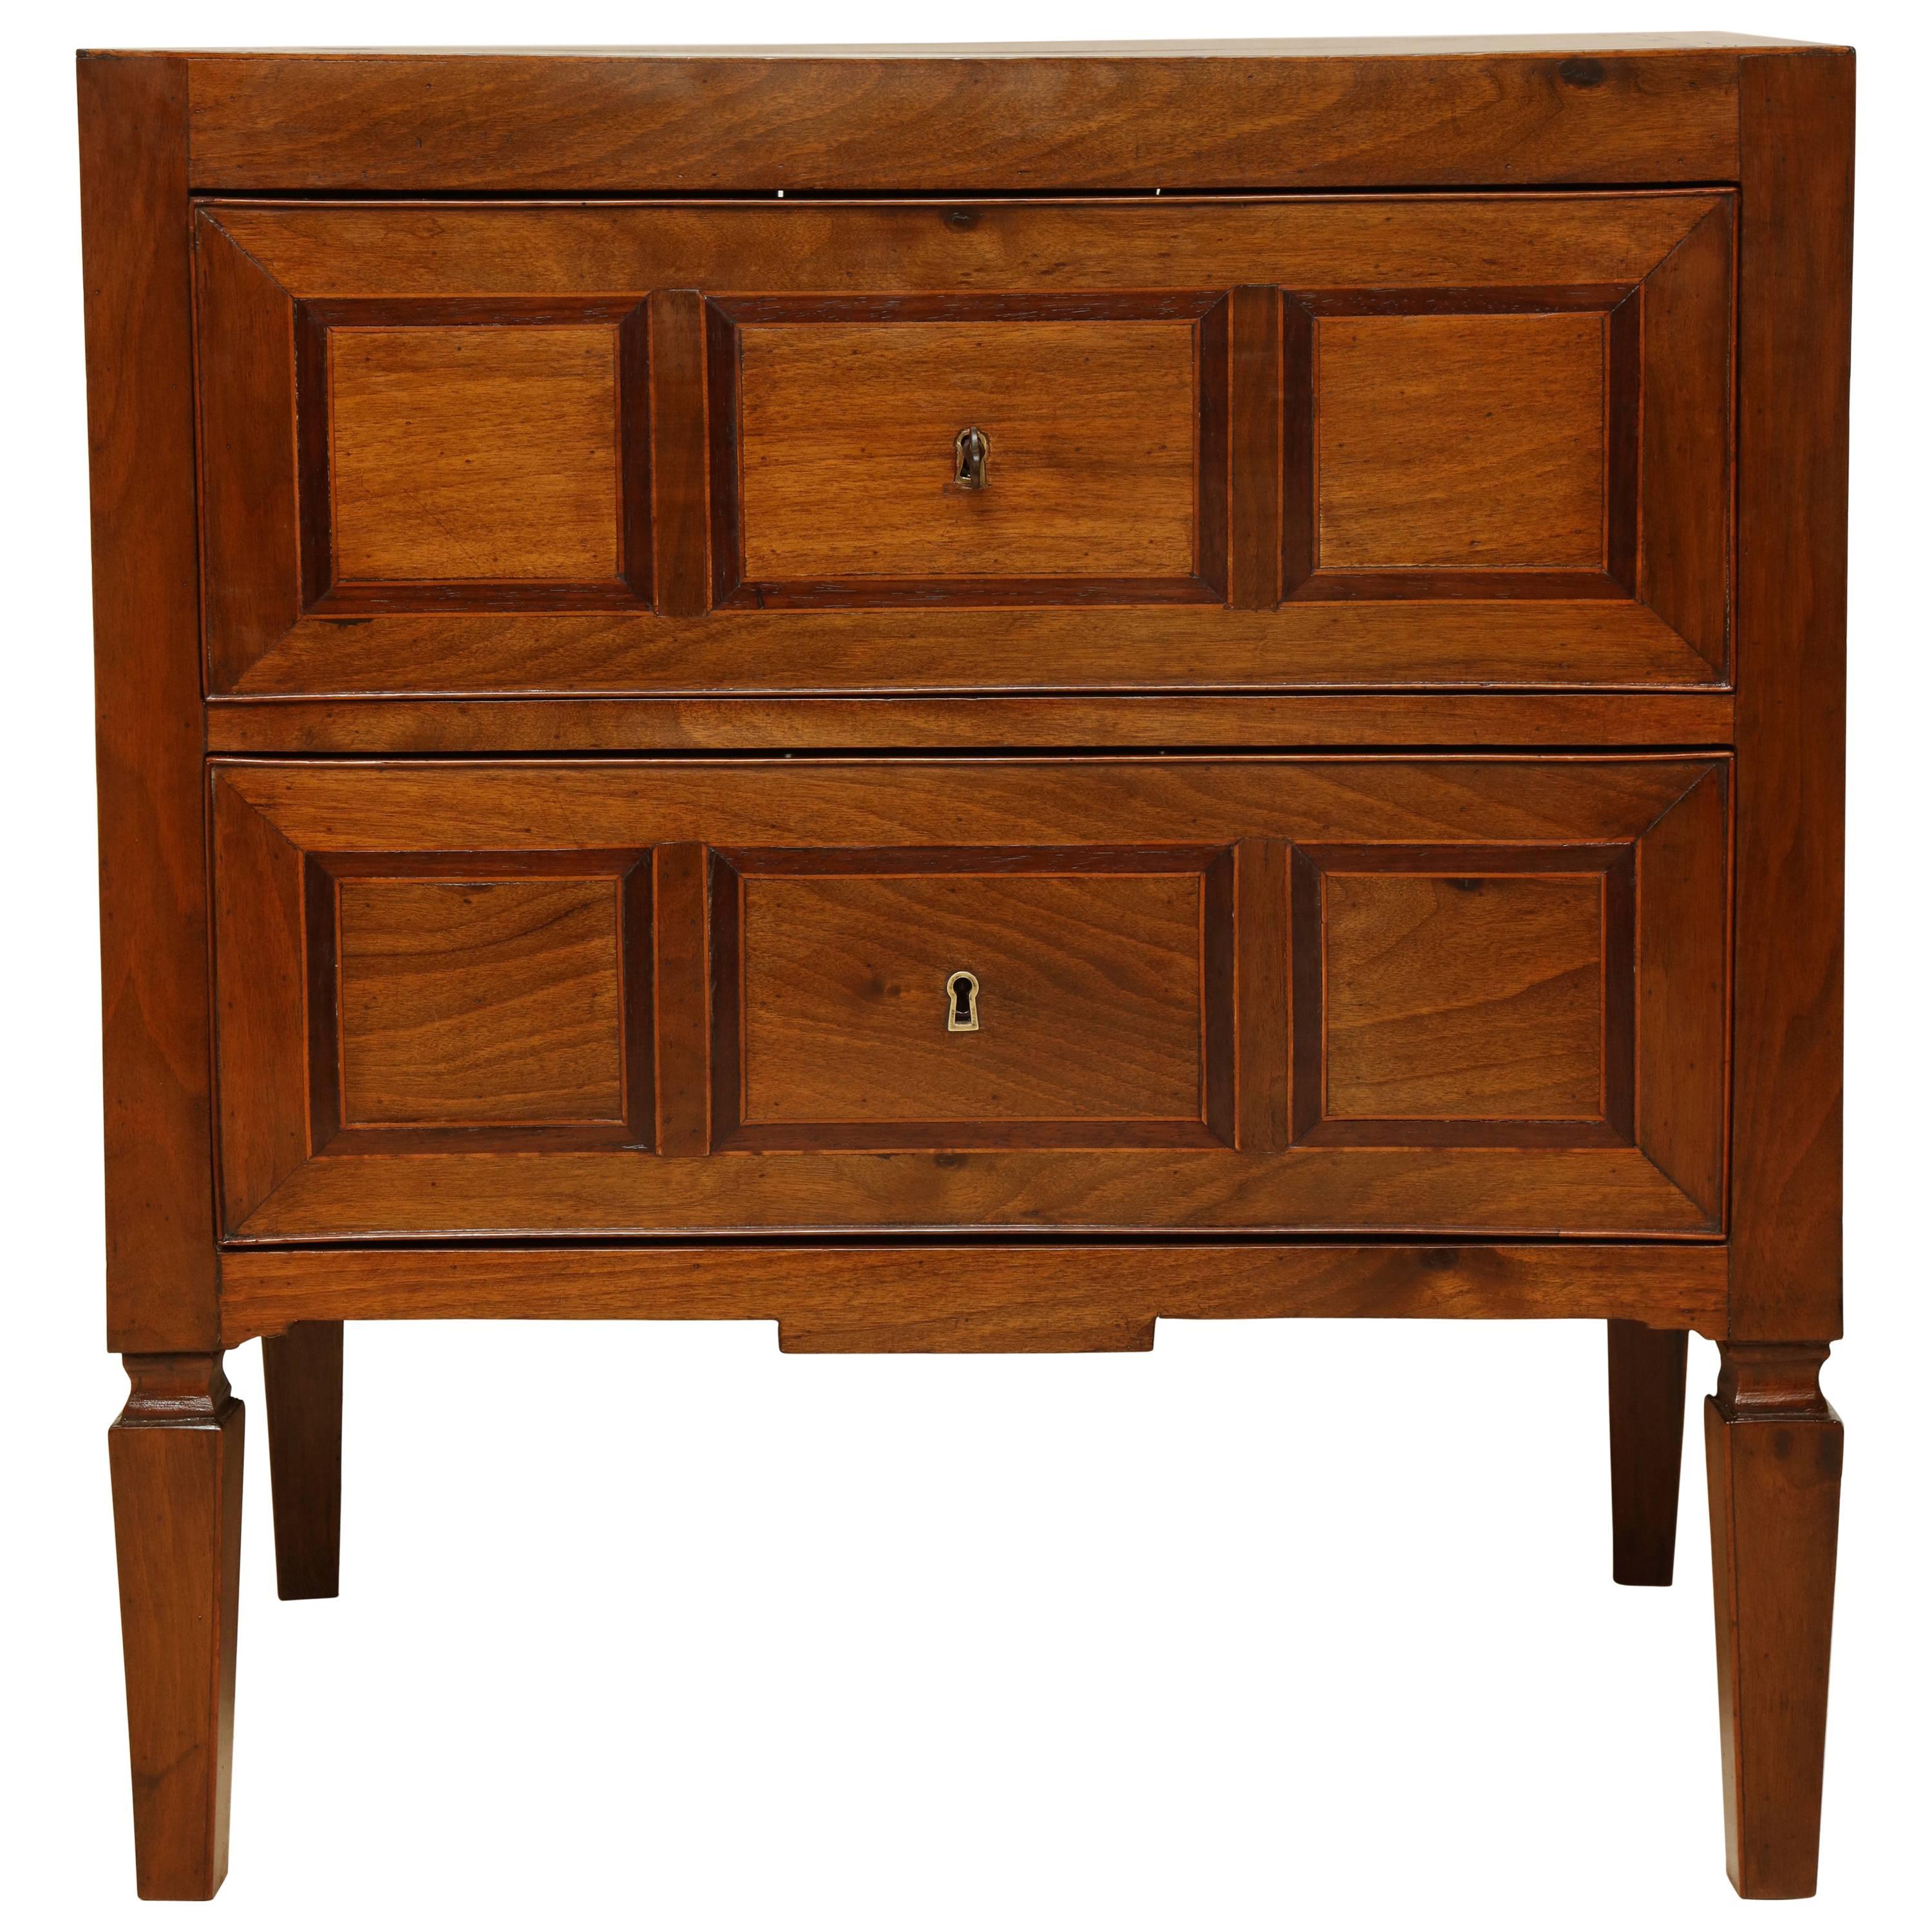 Early 19th Century Italian Two-Drawer Walnut Inlaid Commode